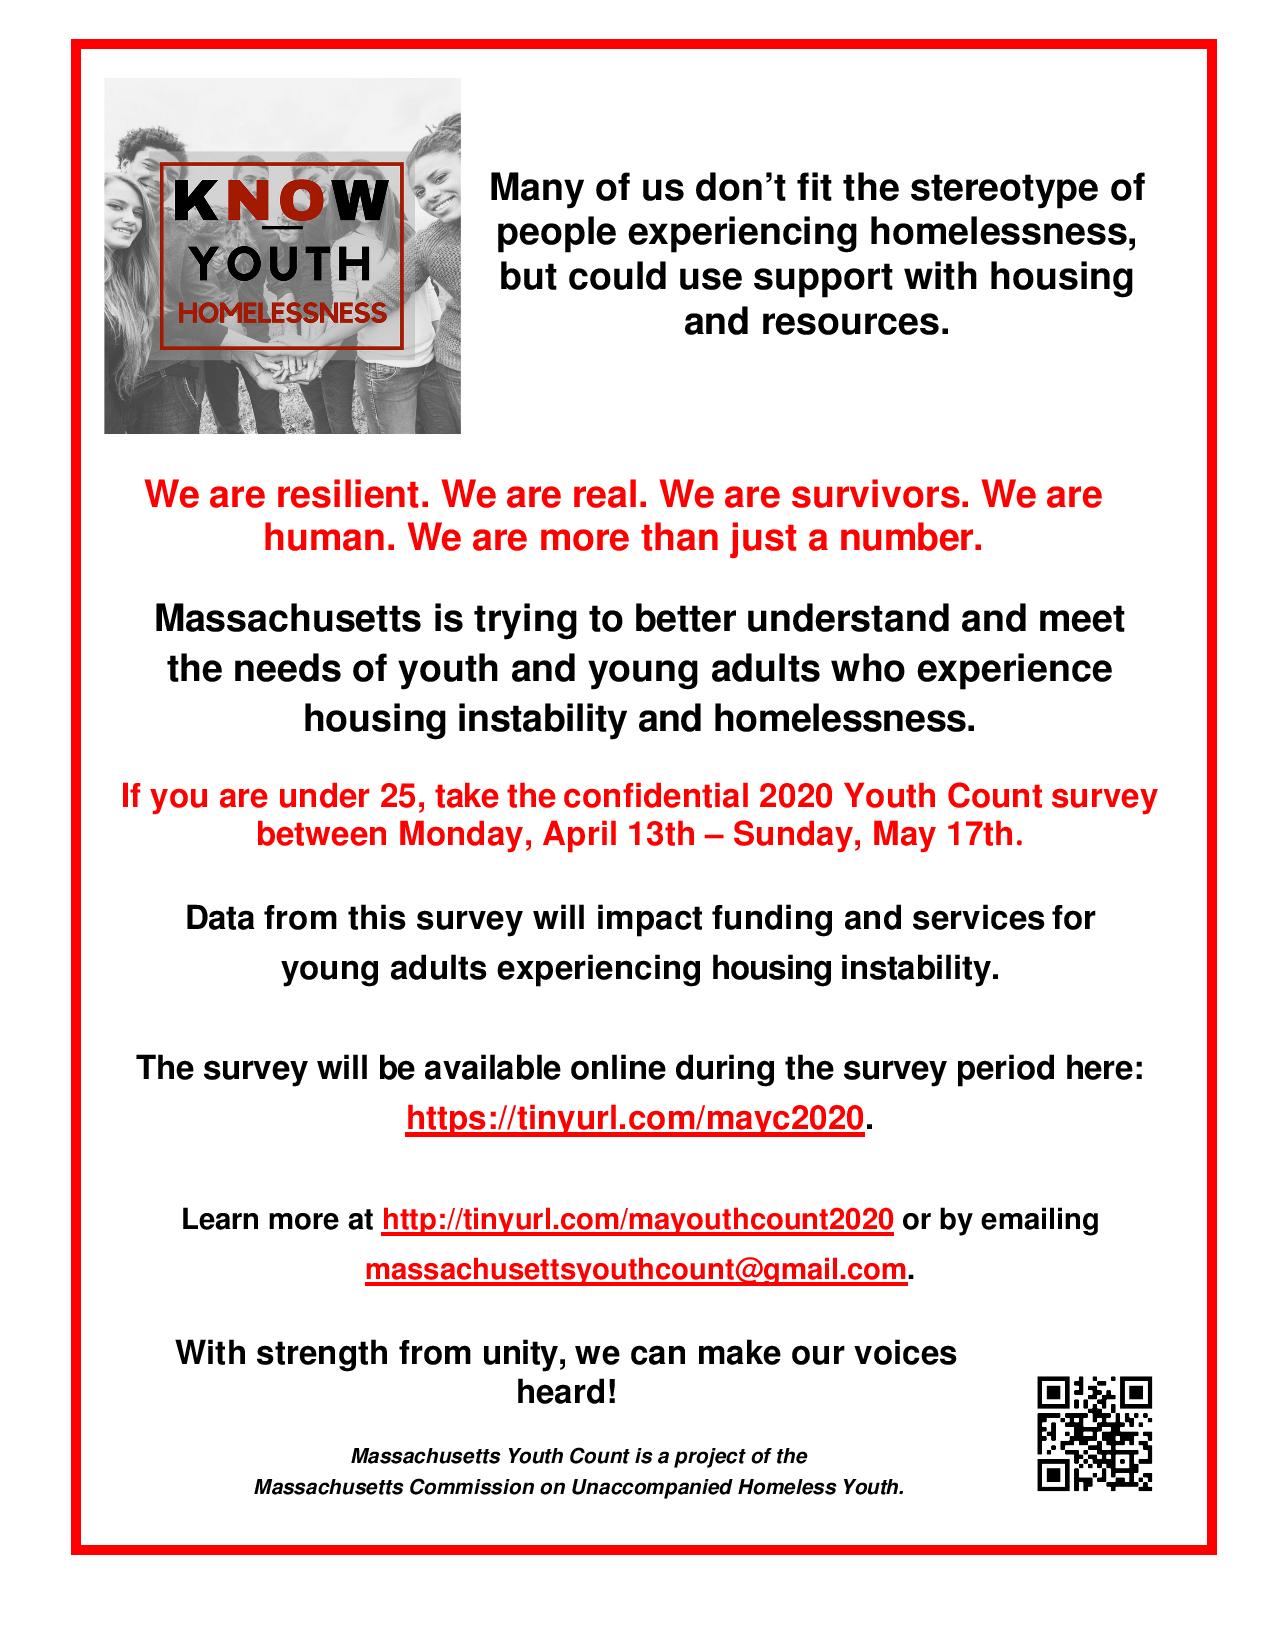 youth count flyer 2020 with weblink and QR code 2 25 20